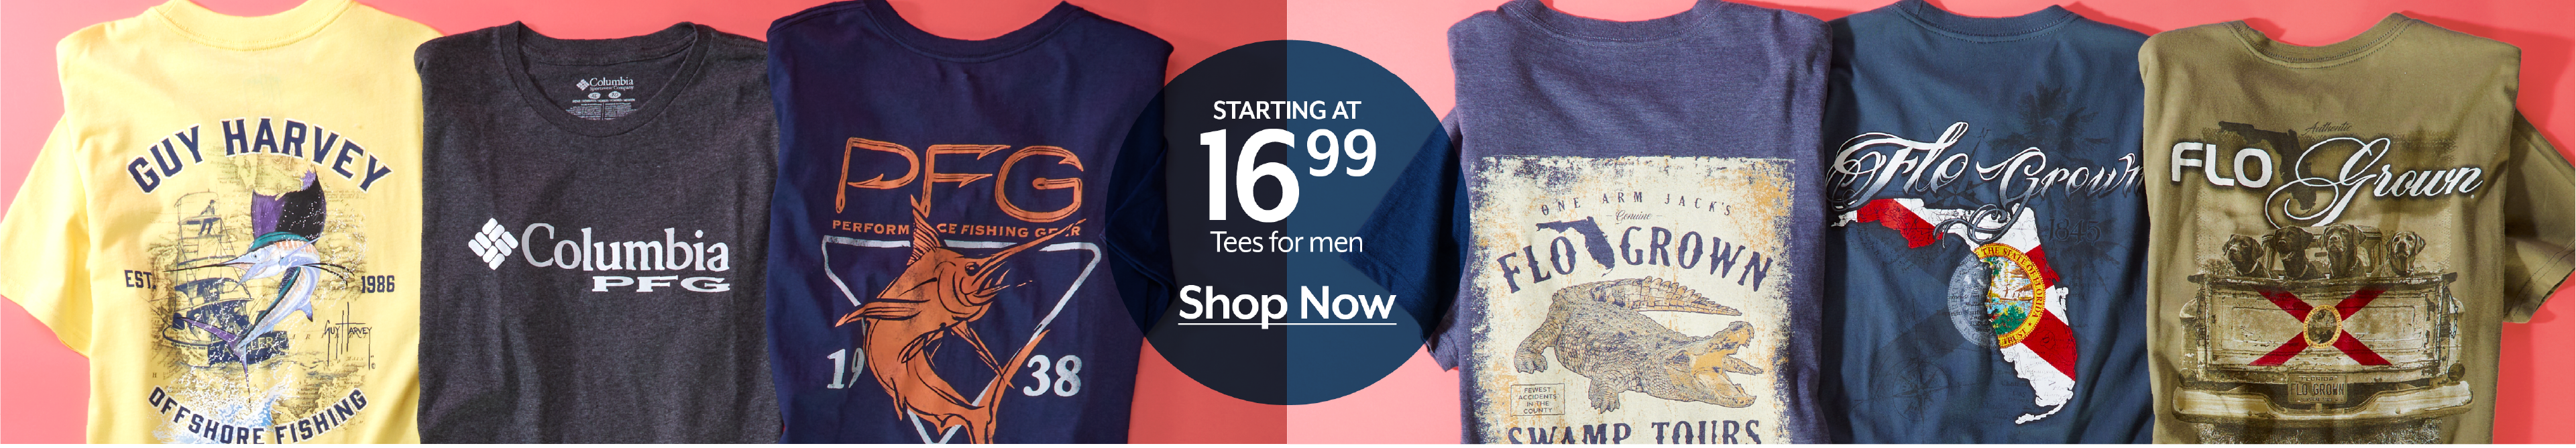 STARTING AT $16.99 Tees for men. Shop now!